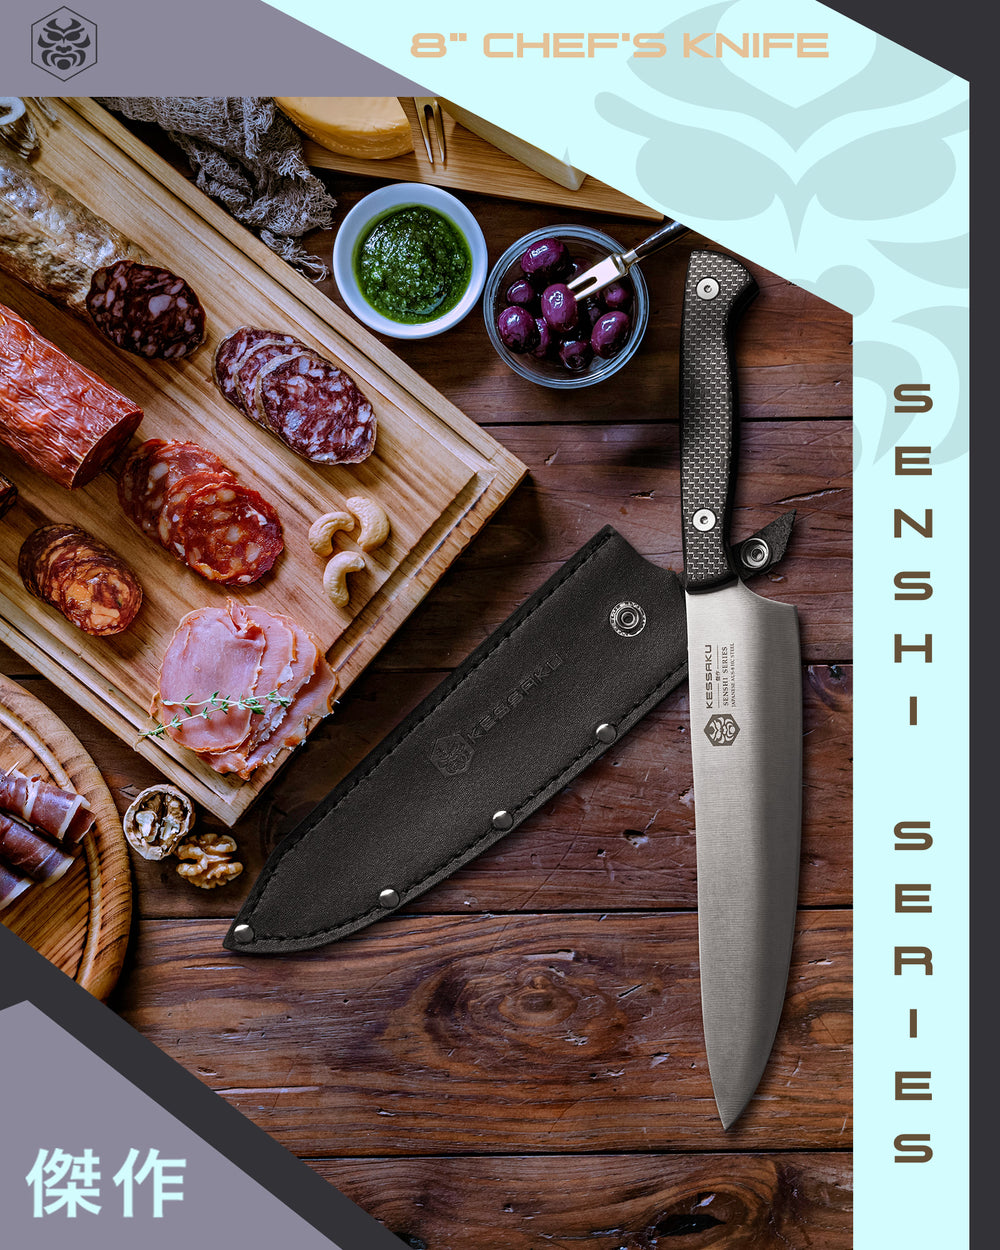 The Senshi Chef's Knife and Leather Sheath amongst cured meats, cheeses, walnuts, and olives